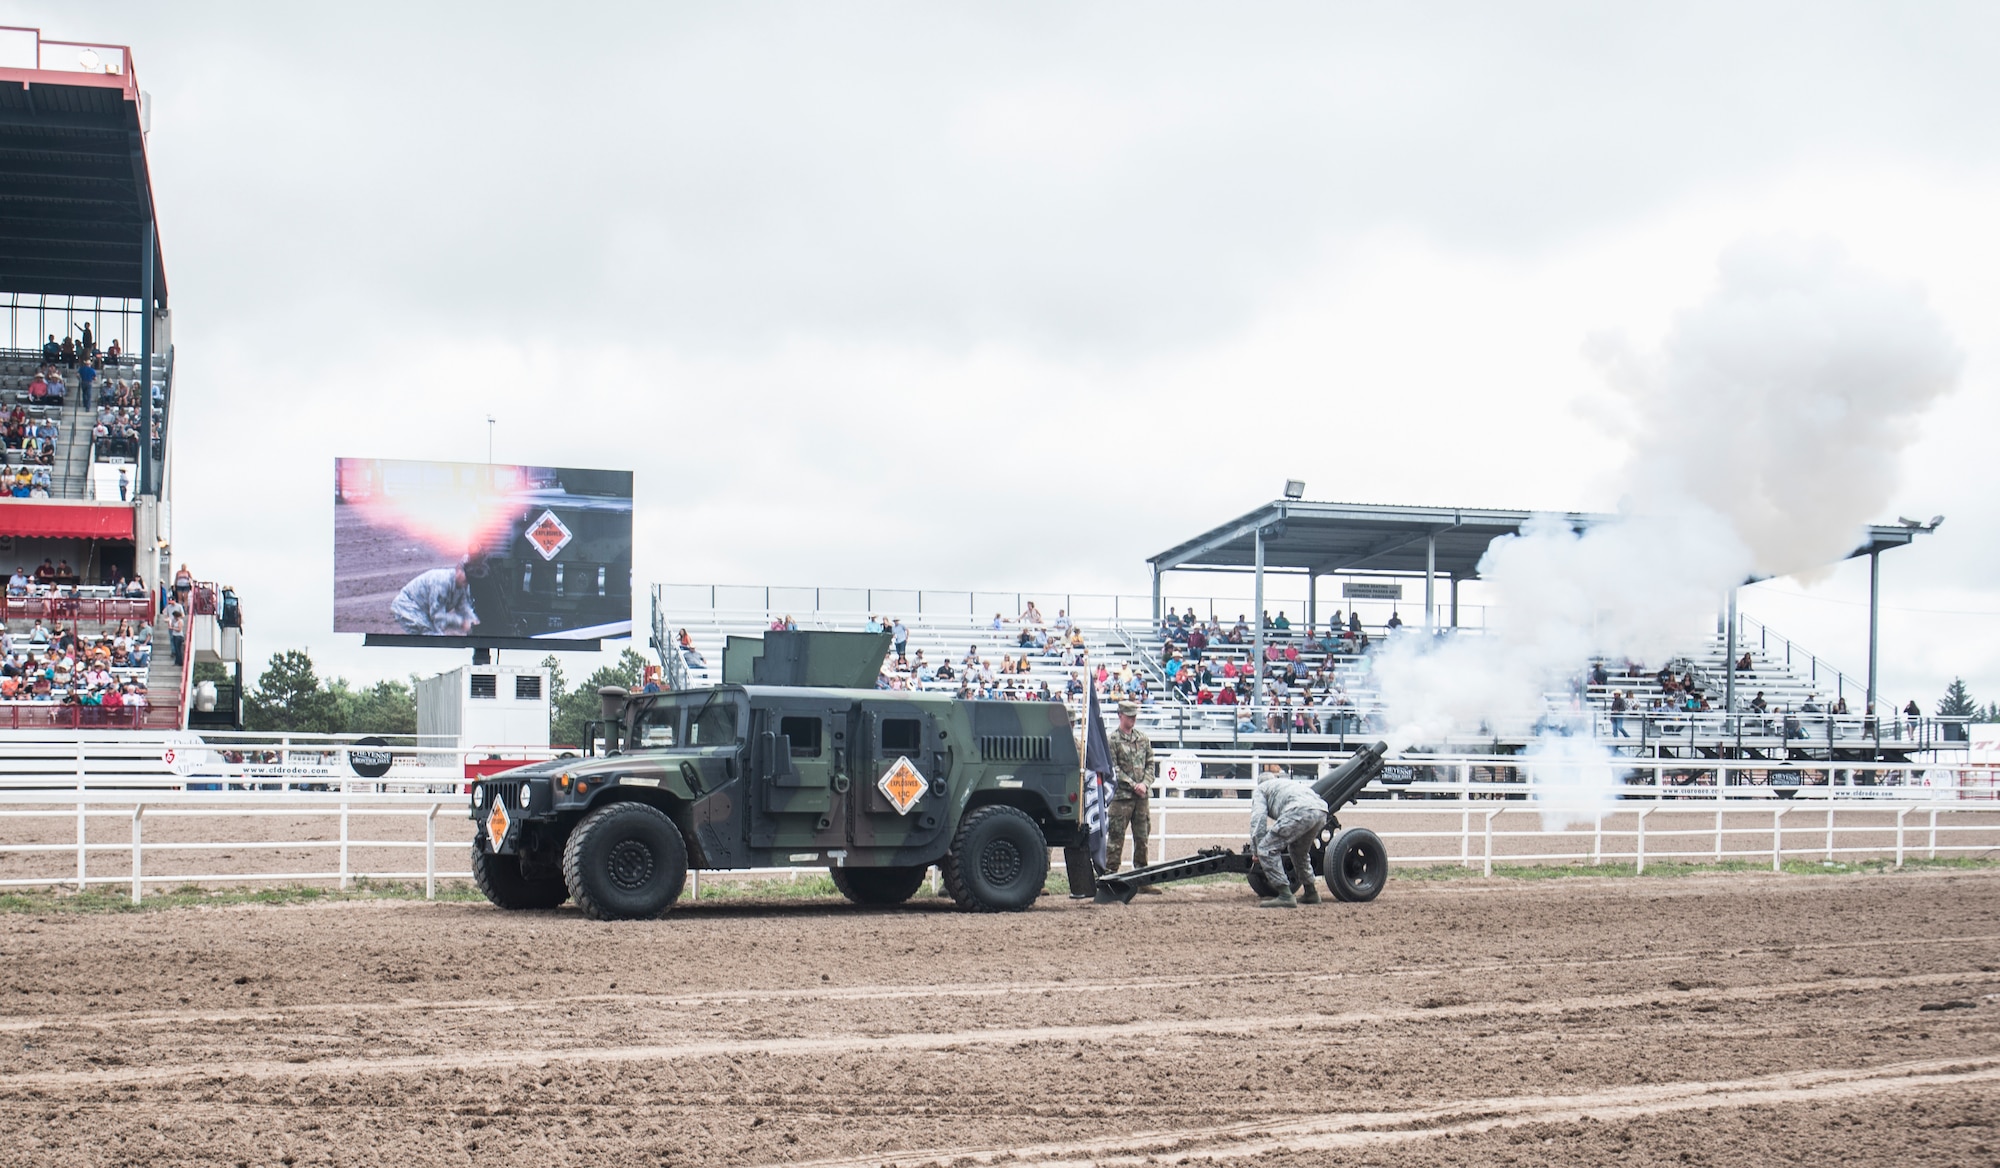 Airmen from the 90th Munitions Squadron fire a cannon at the Grand Entrance to the Cheyenne Frontier Days grounds July 20, 2019 in Cheyenne, Wyo. The Grand Entrance marks the official beginning of the rodeo at CFD. The F.E. Warren Air Force Base and Cheyenne communities came together to celebrate the CFD rodeo and festival, which runs from July 19-28. (U.S. Air Force photo by Senior Airman Abbigayle Williams)